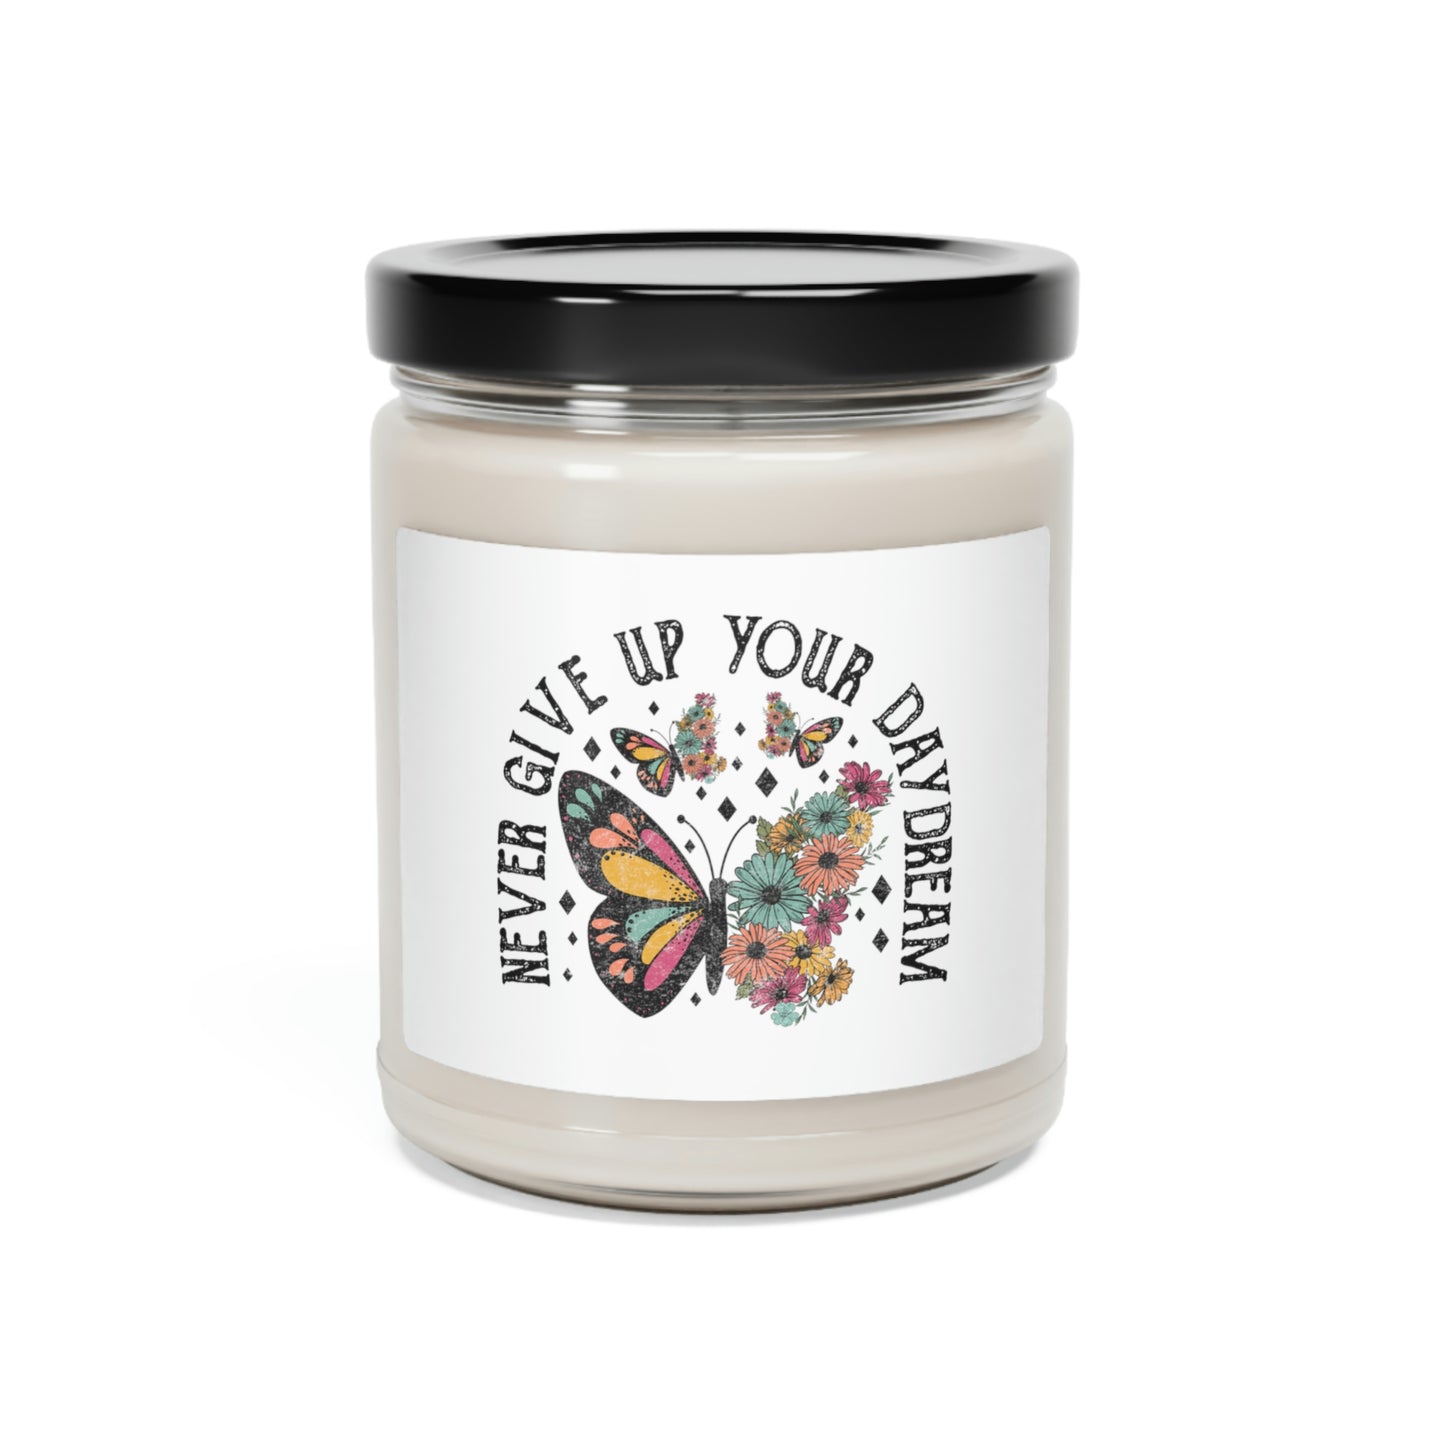 Never give up your day dream Scented Soy Candle, 9oz - Apple Harvest / 9oz